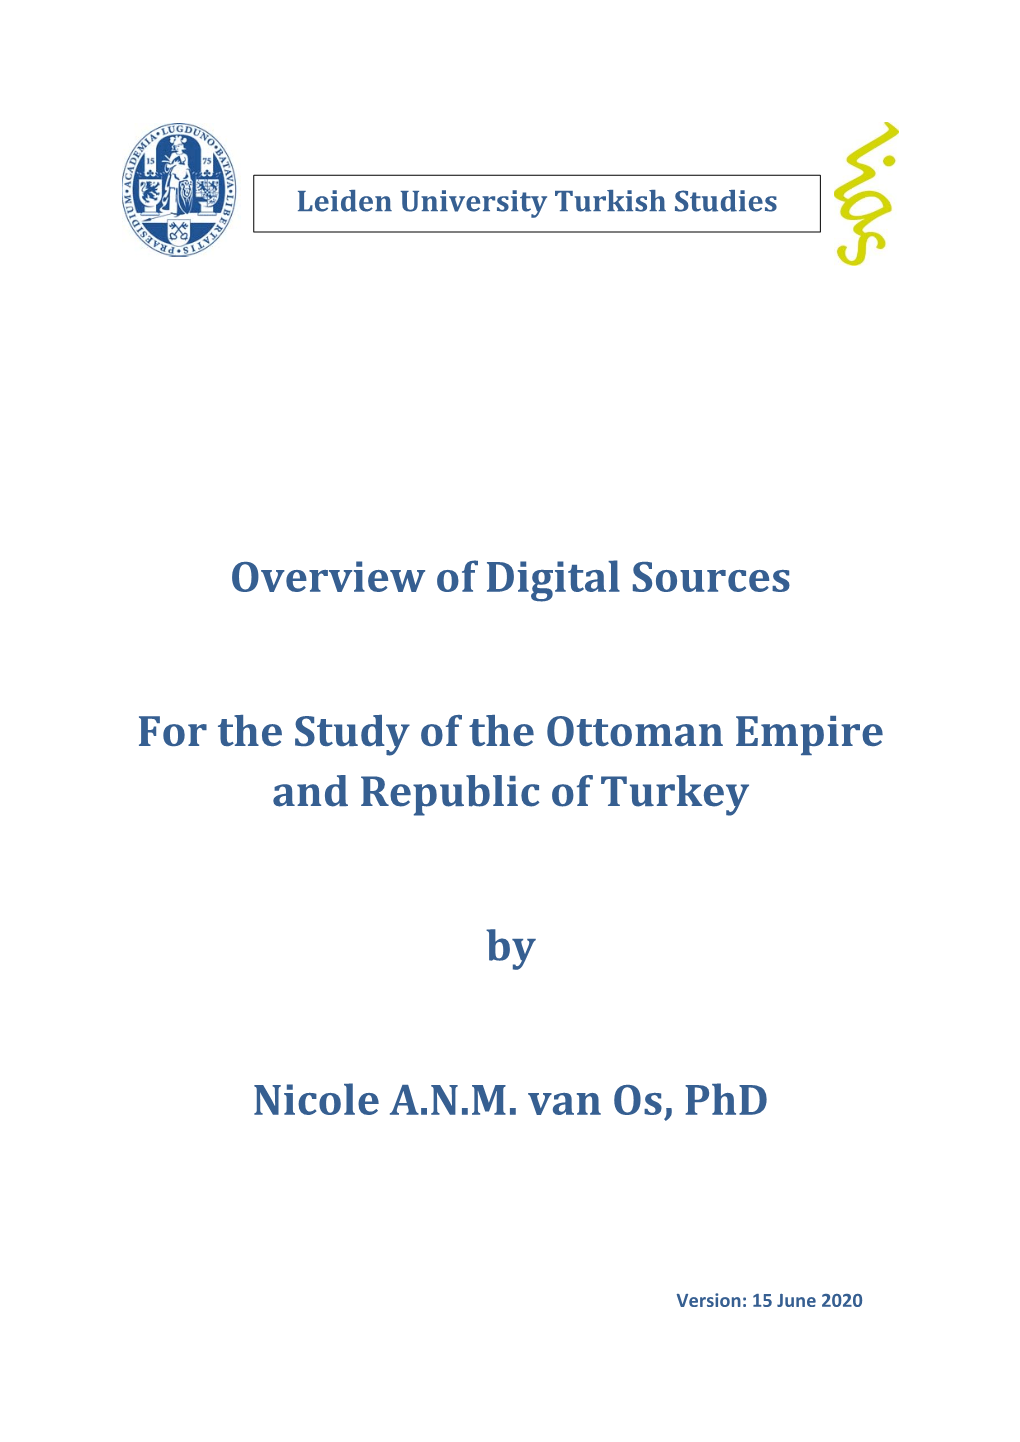 Overview of Digital Sources for the Study of the Ottoman Empire And